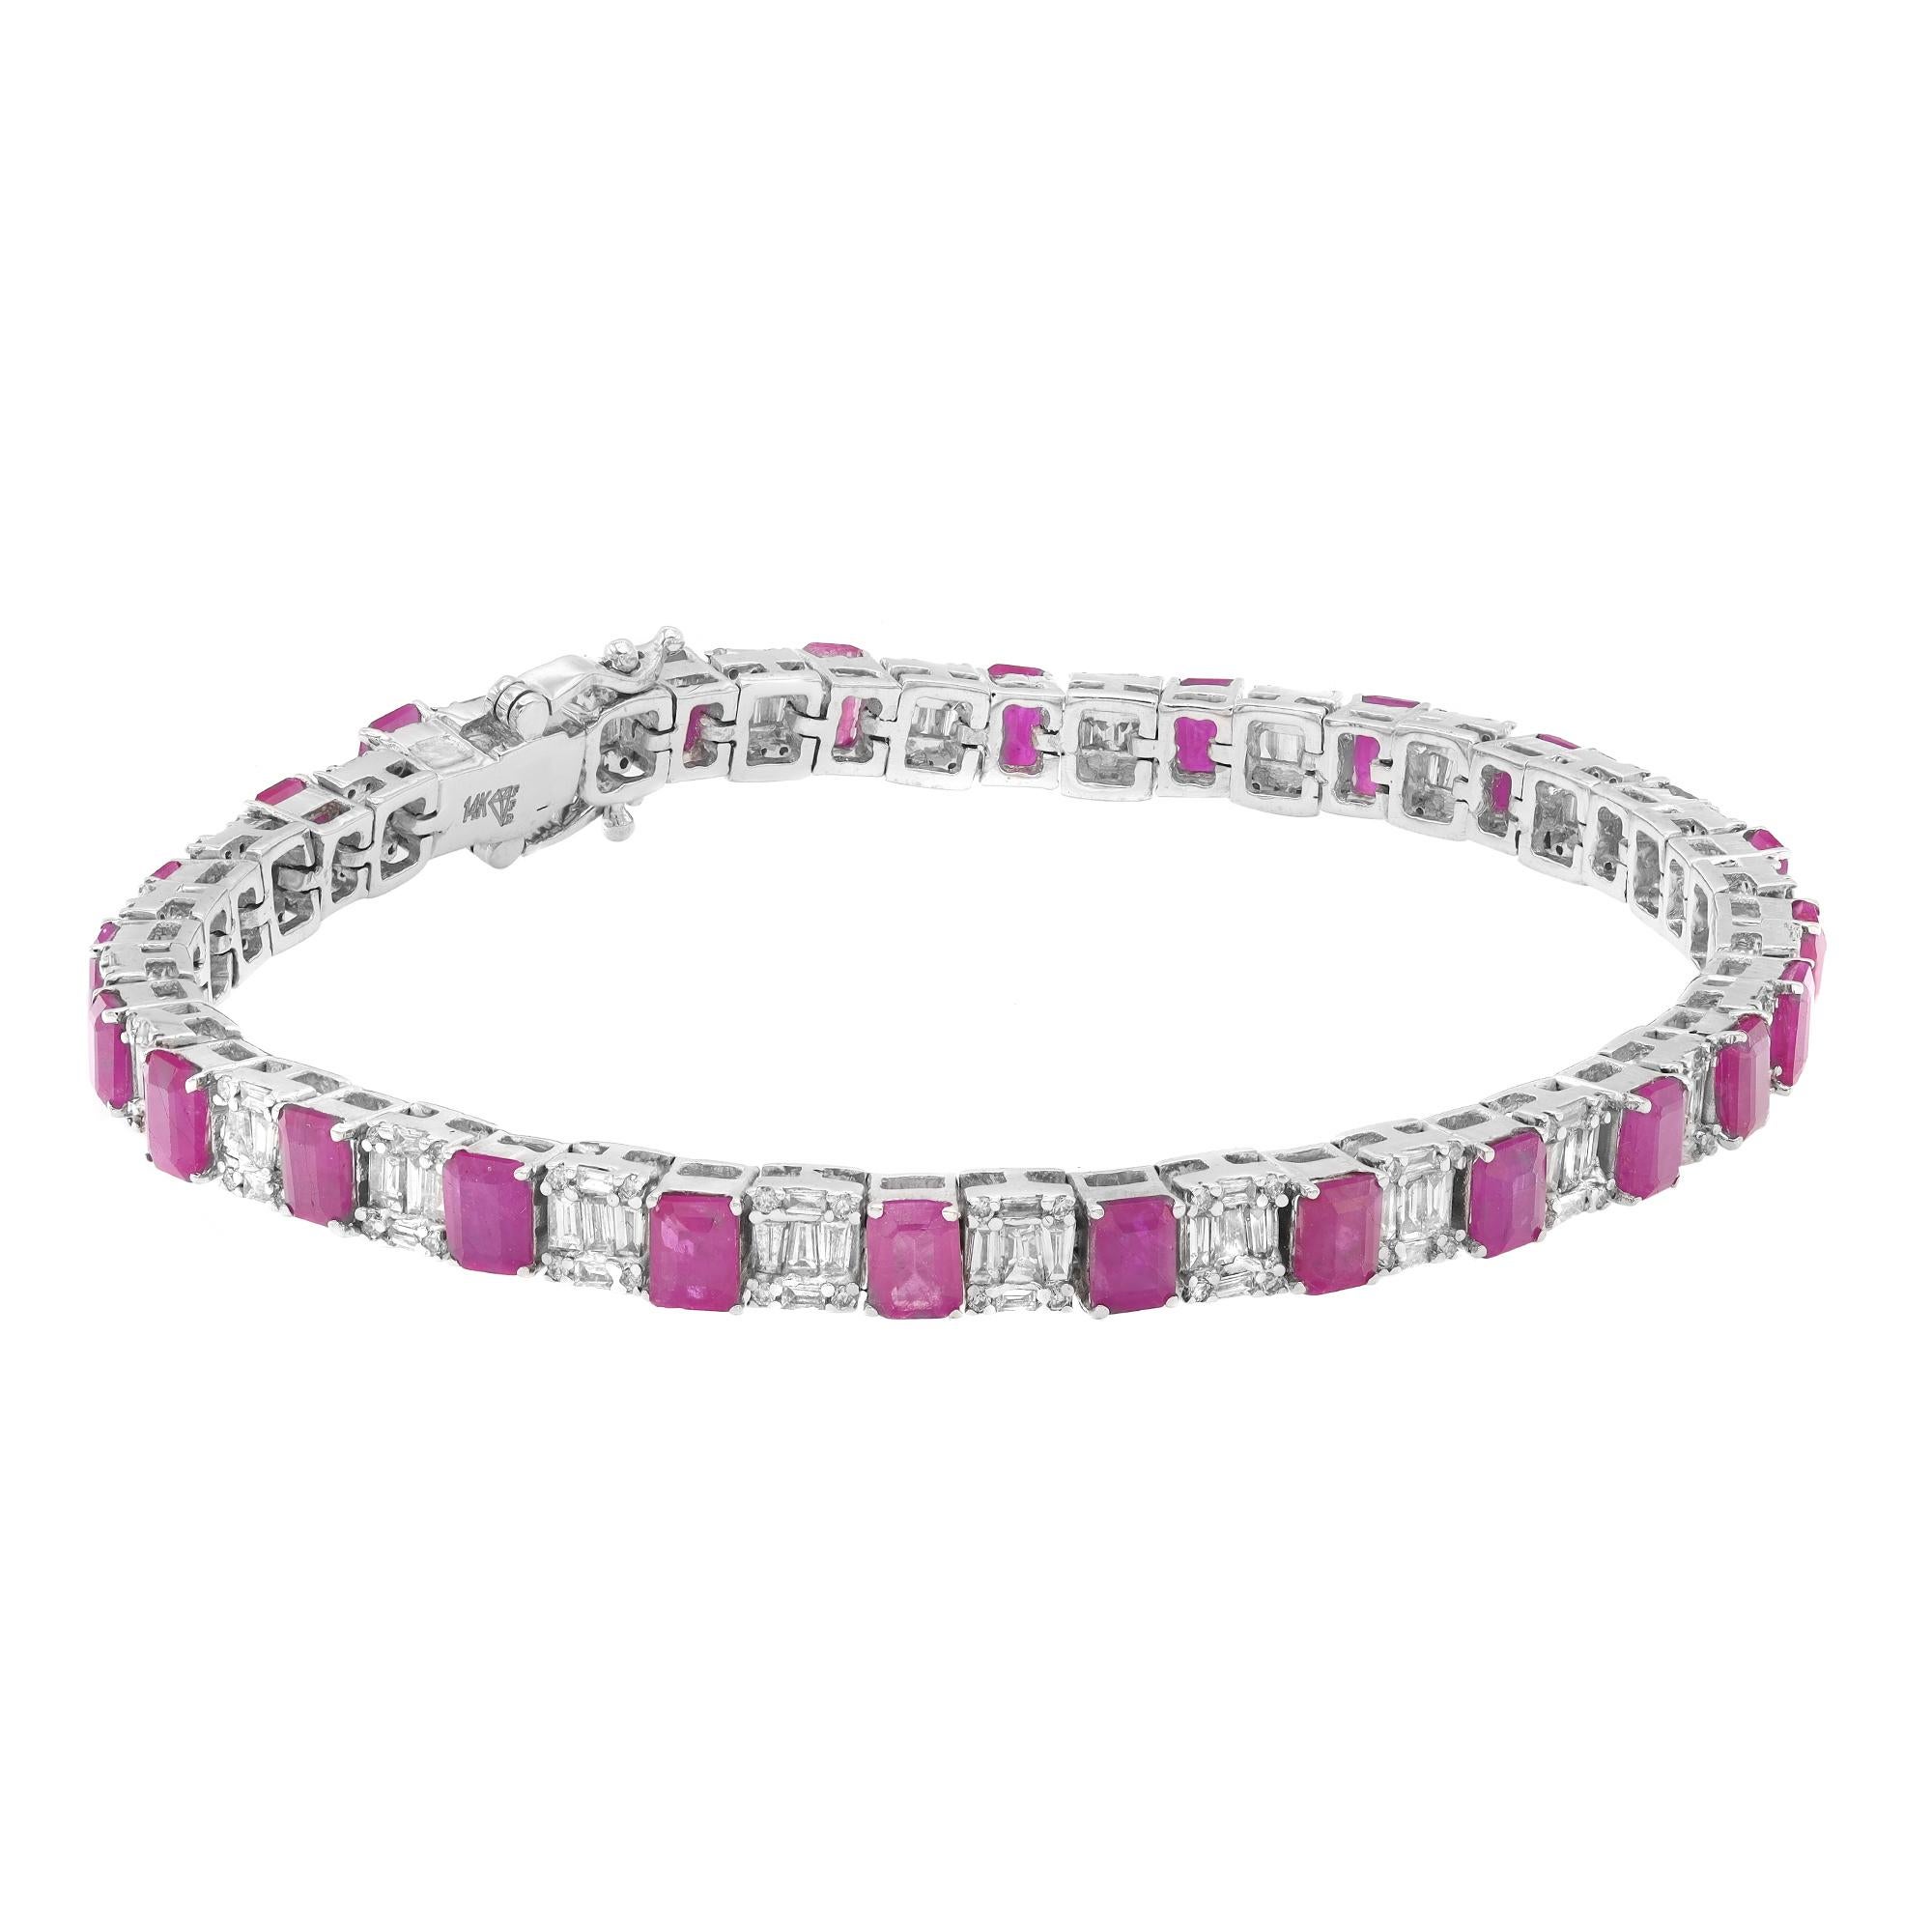 This beautifully crafted tennis bracelet features emerald cut rubies with baguette and round cut diamonds in prong and channel setting. Crafted in 14k white gold. Total diamond weight: 2.33 carats. Diamond Quality: G-H color and SI clarity. Total